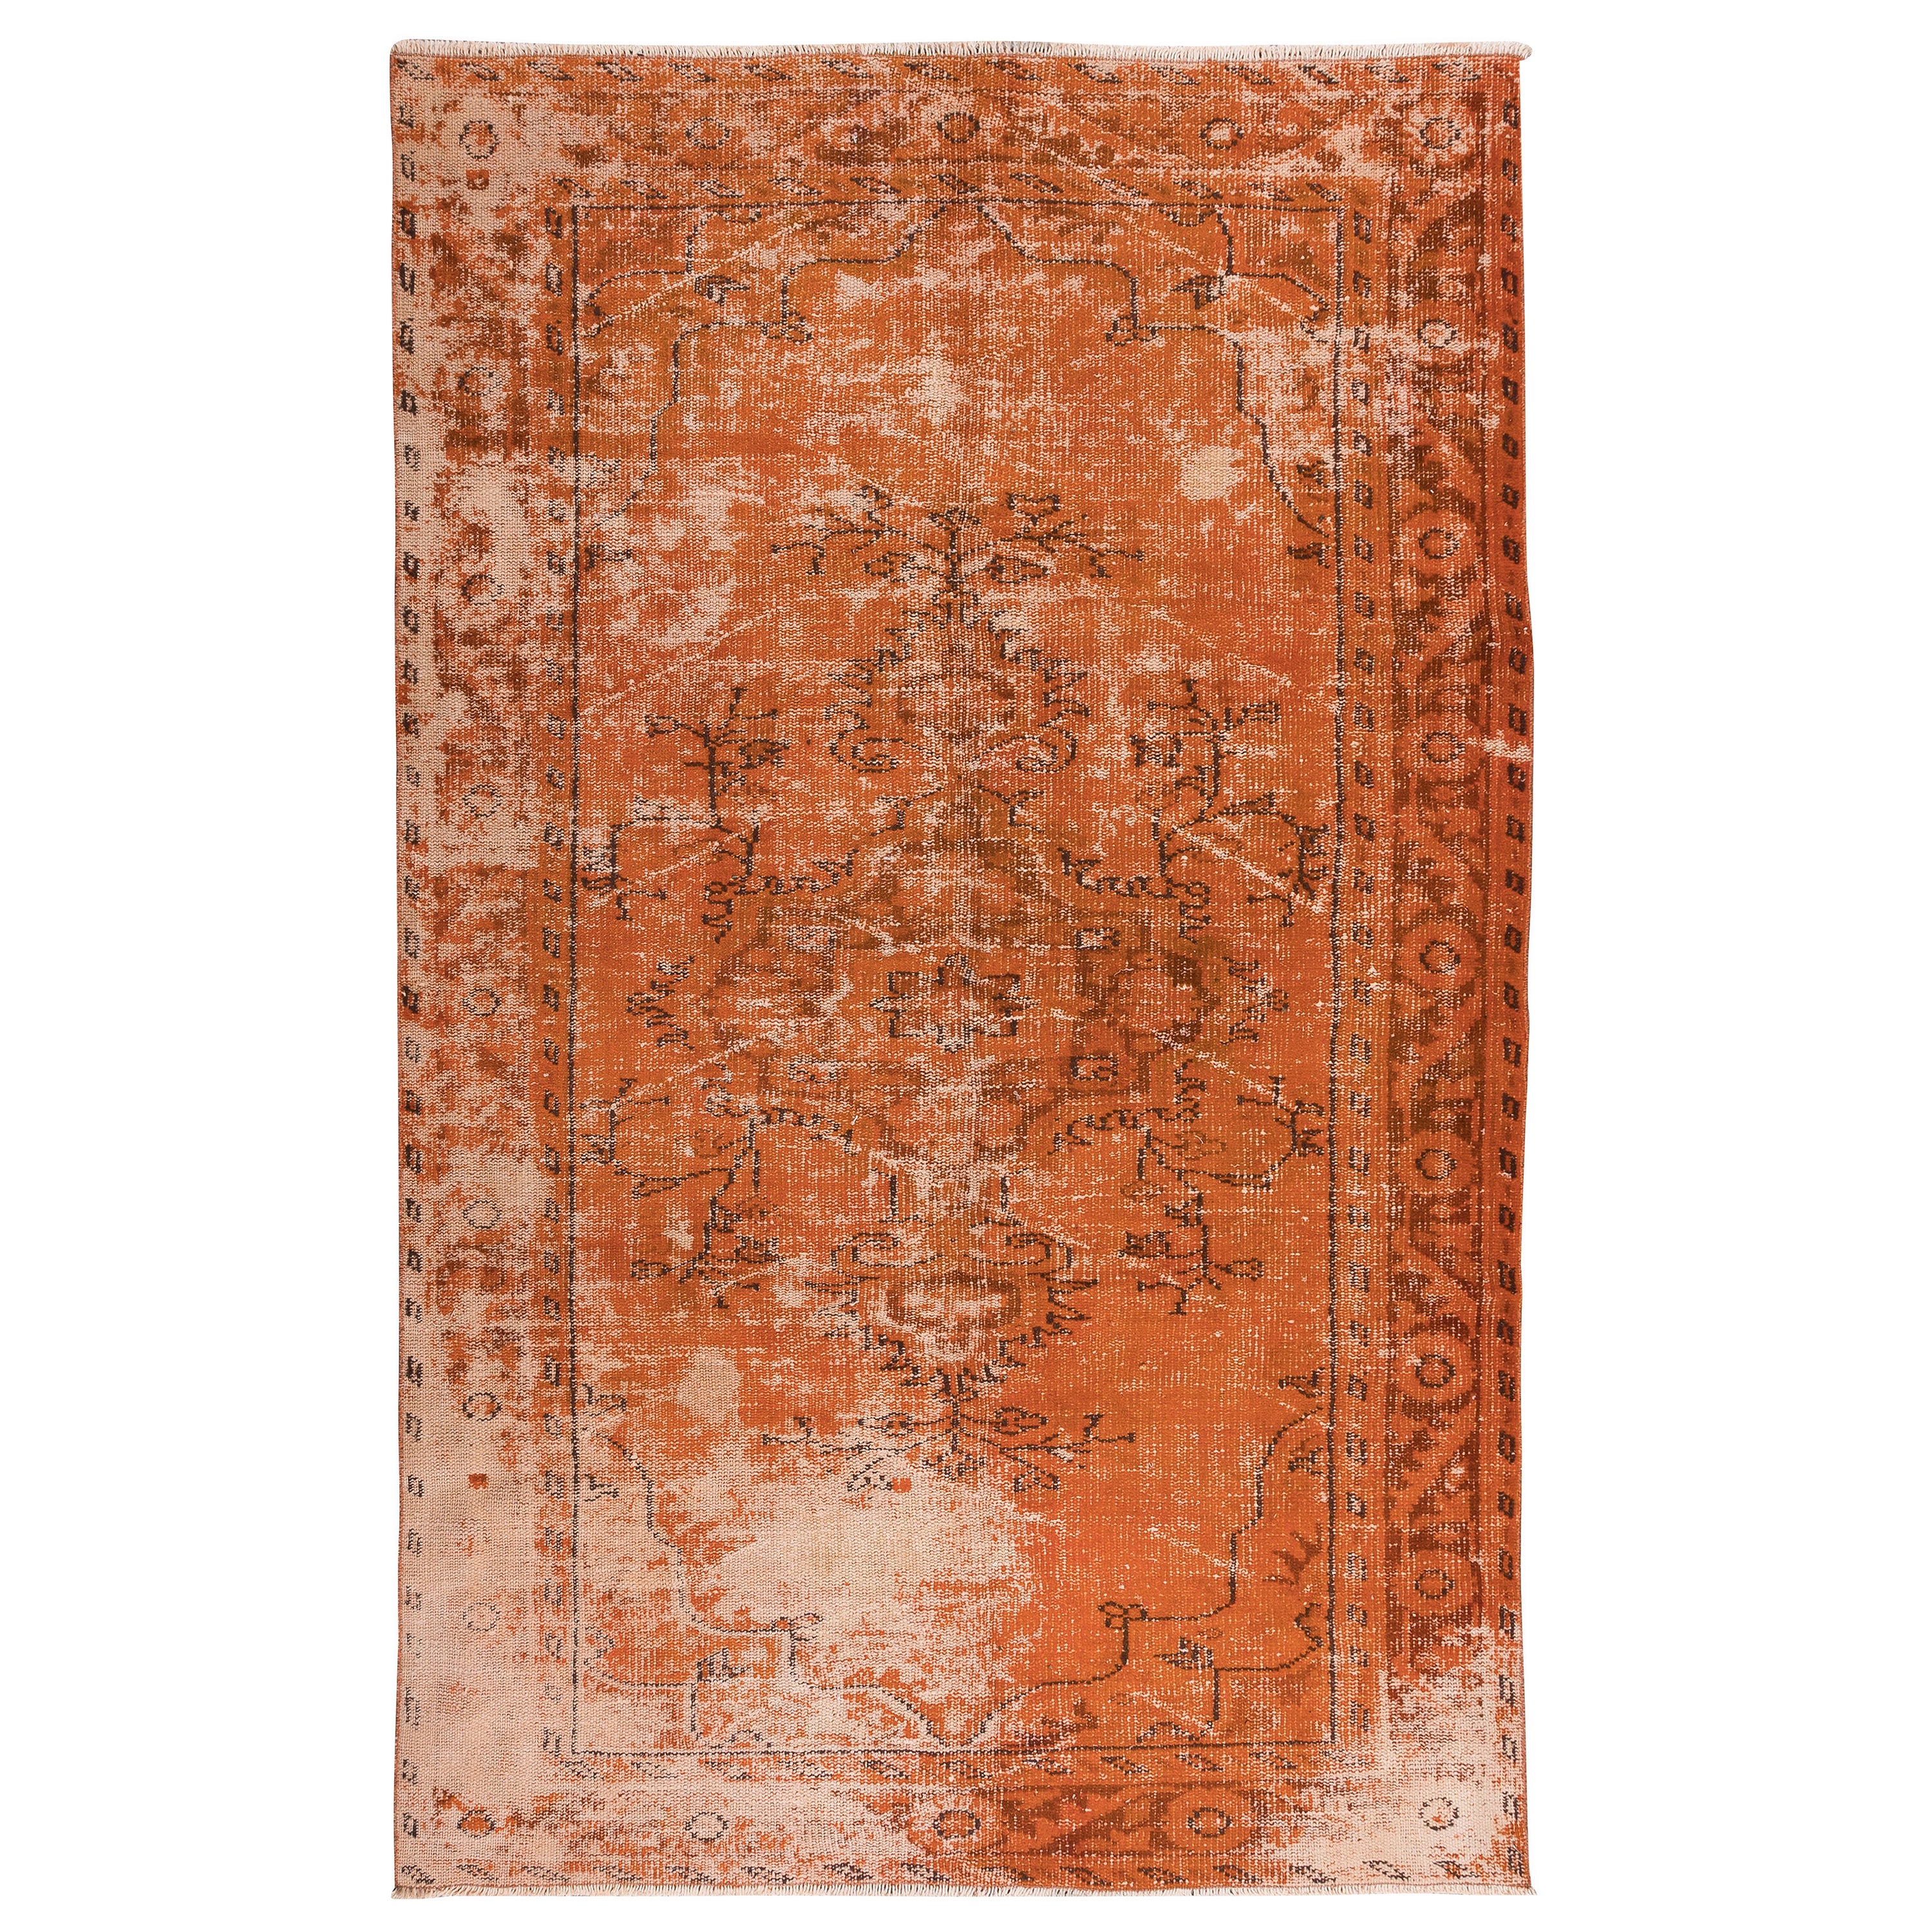 5.4x8.4 Ft Handmade Turkish Vintage Rug with Shabby Chic Style in Orange Tones